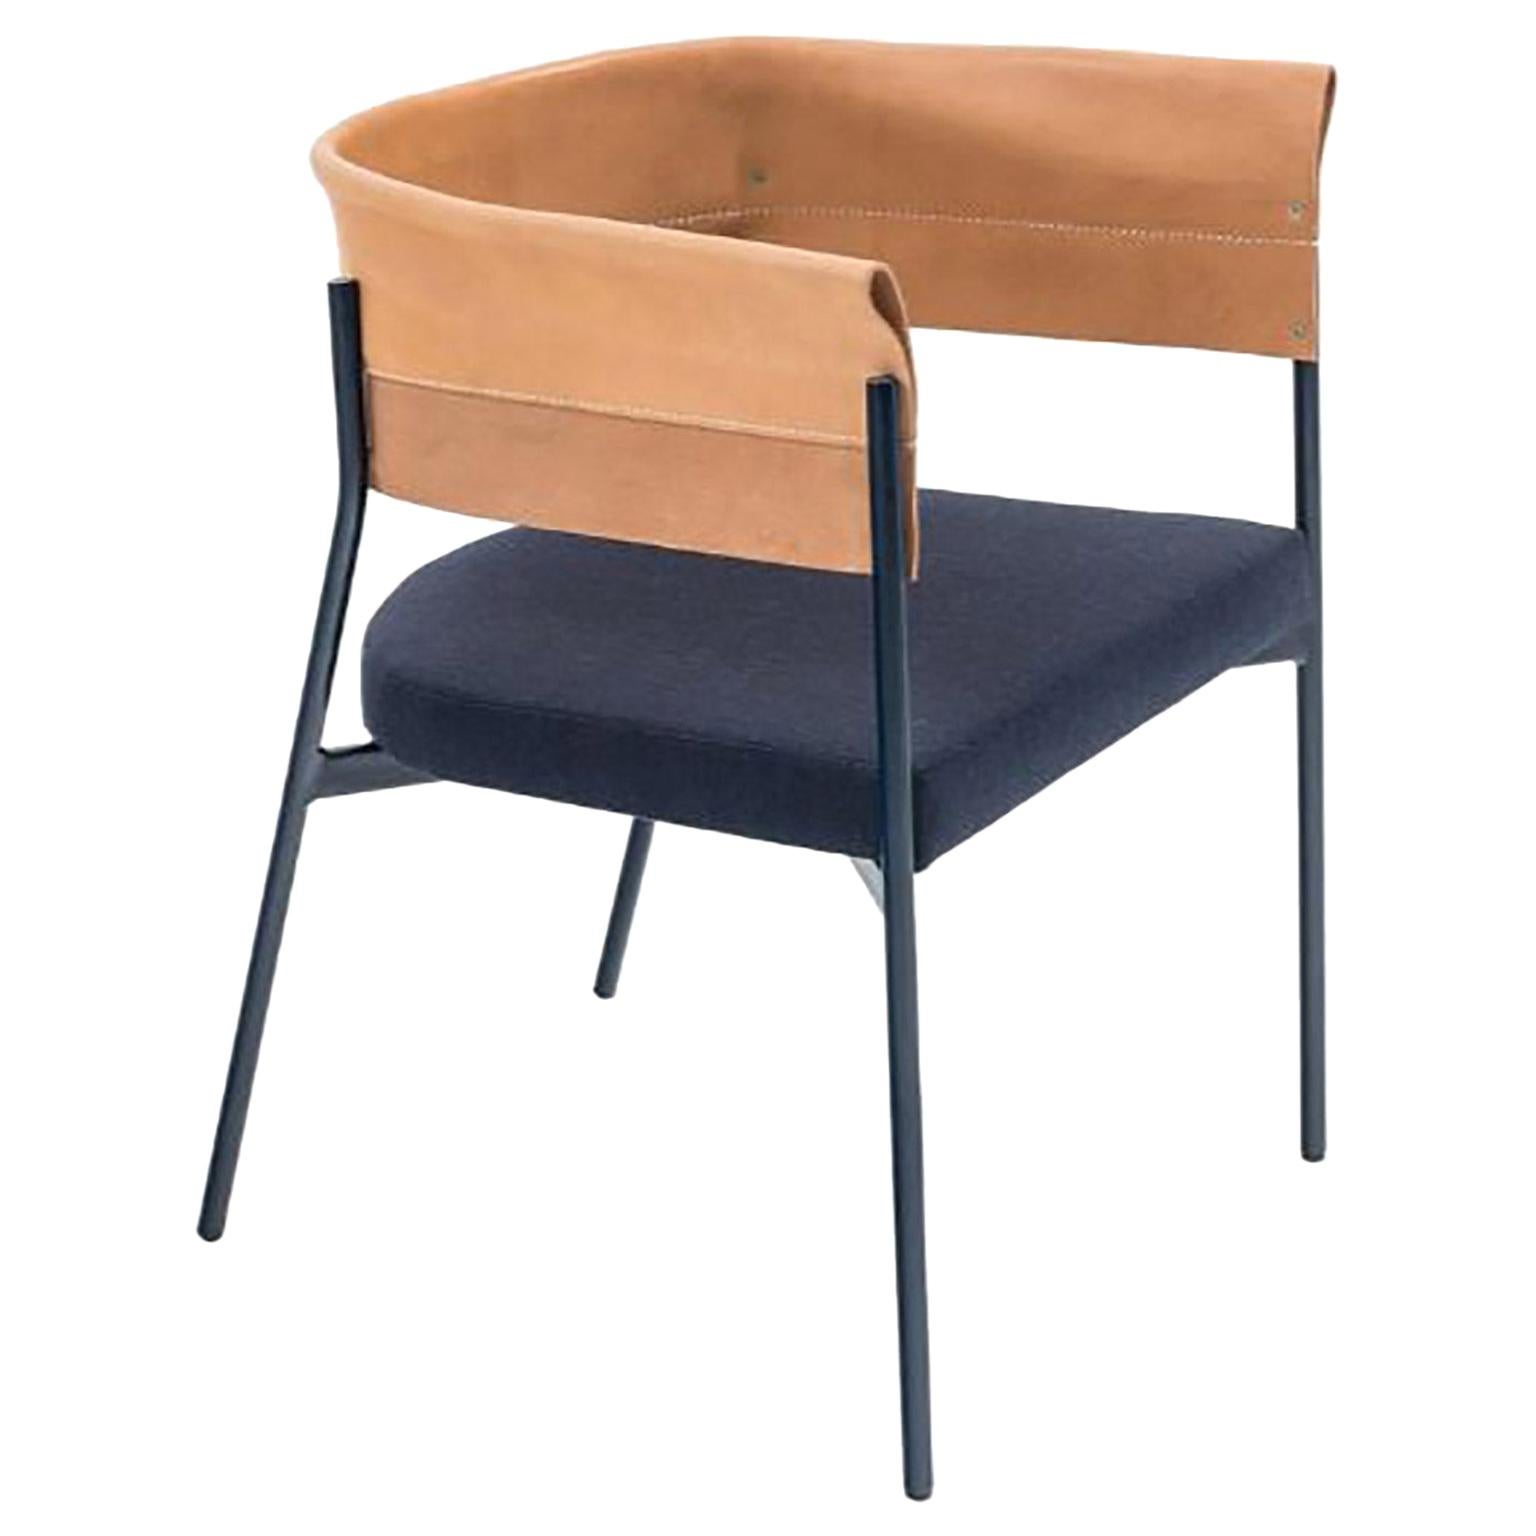 Contemporary Tailor Made Gomito L Chair, Handcrafted Folded Leather Backrest